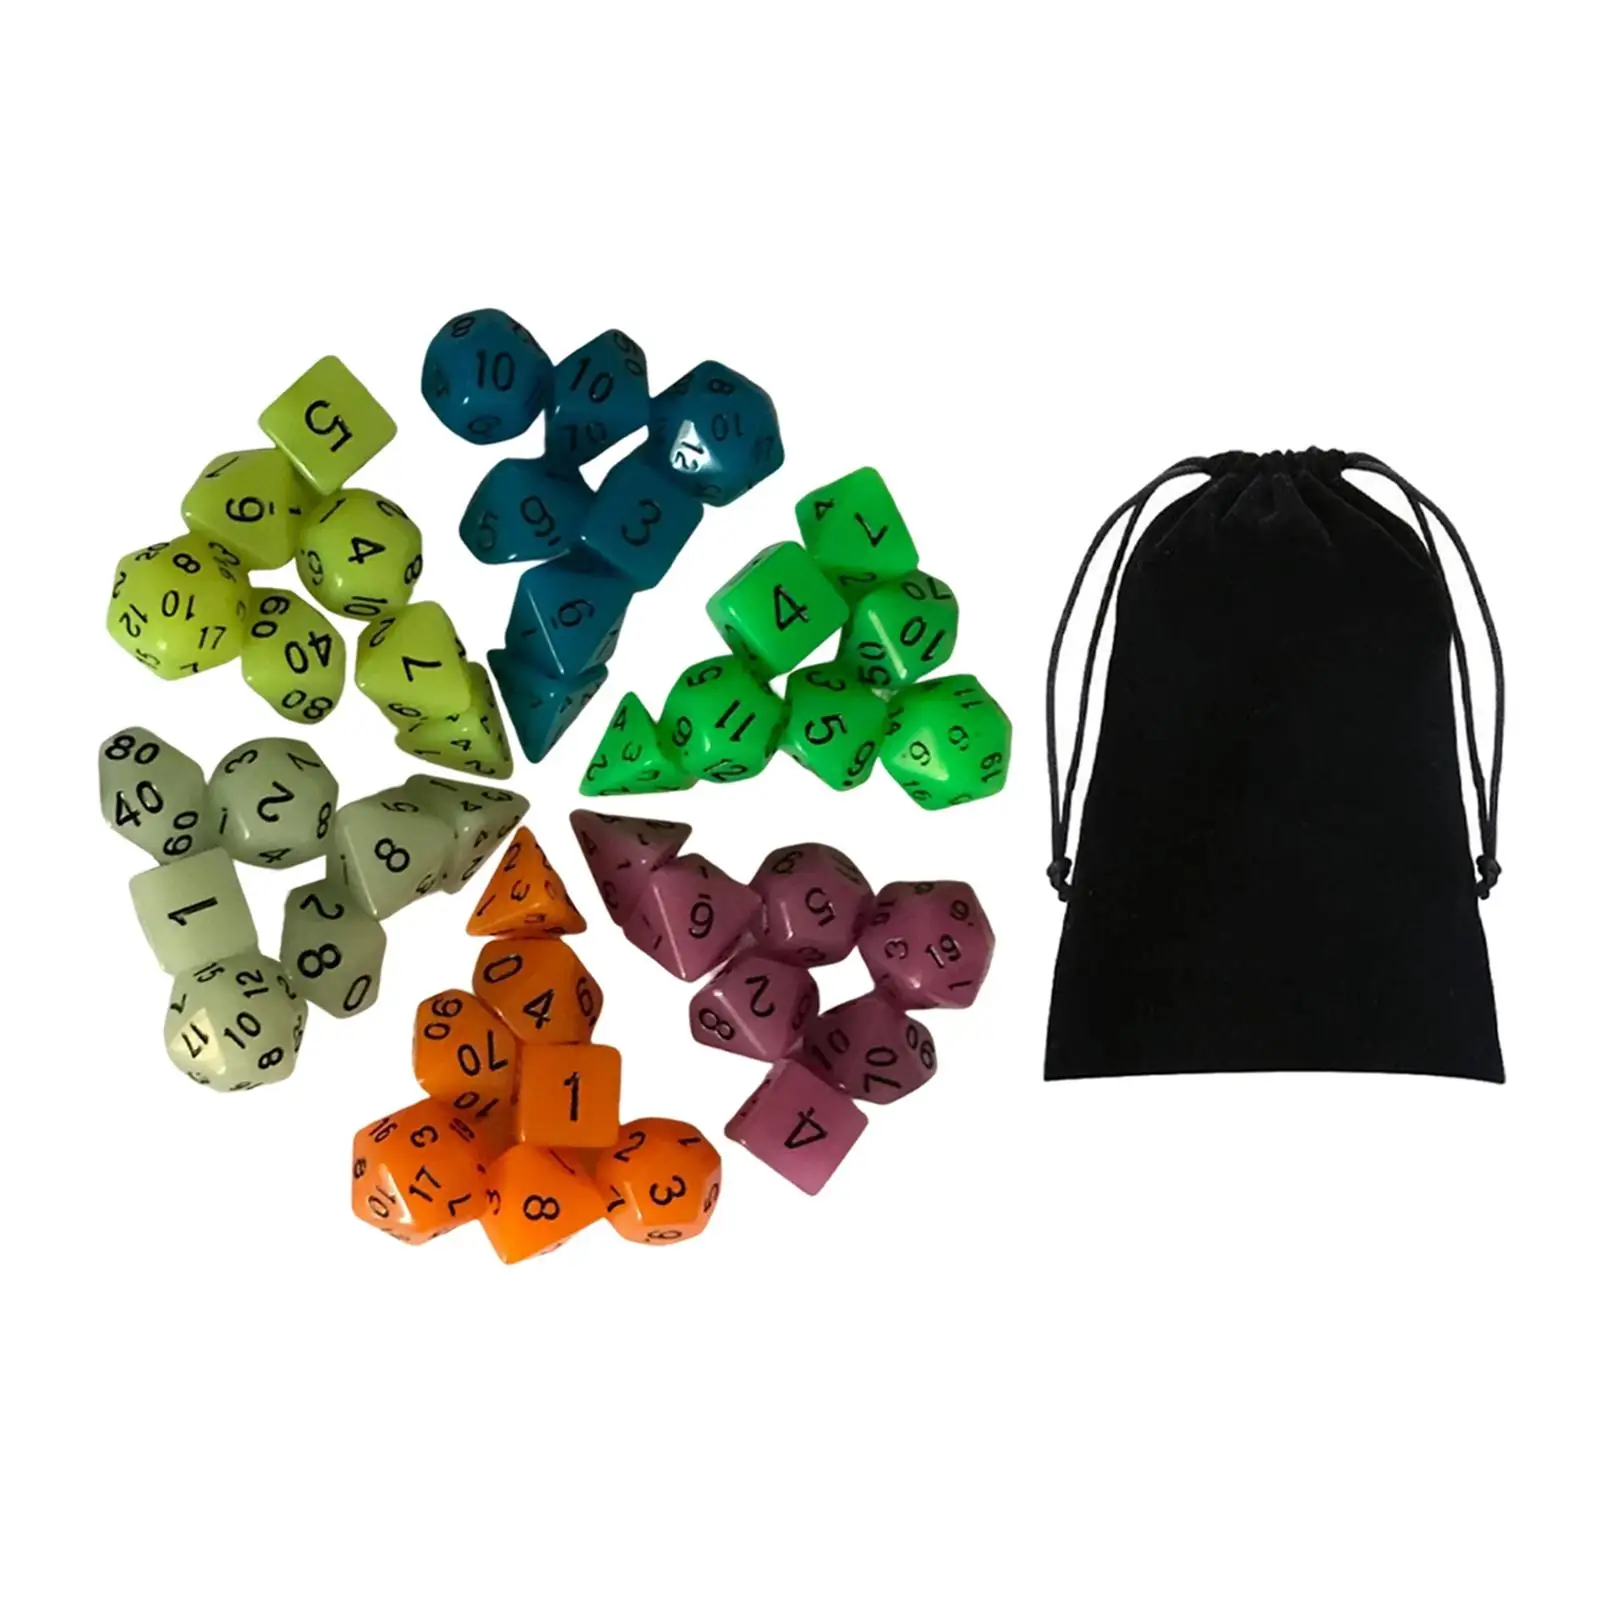 Pack of 42 Luminous RPG Dices Set Toys D4-D20 for MTG RPG Board Game